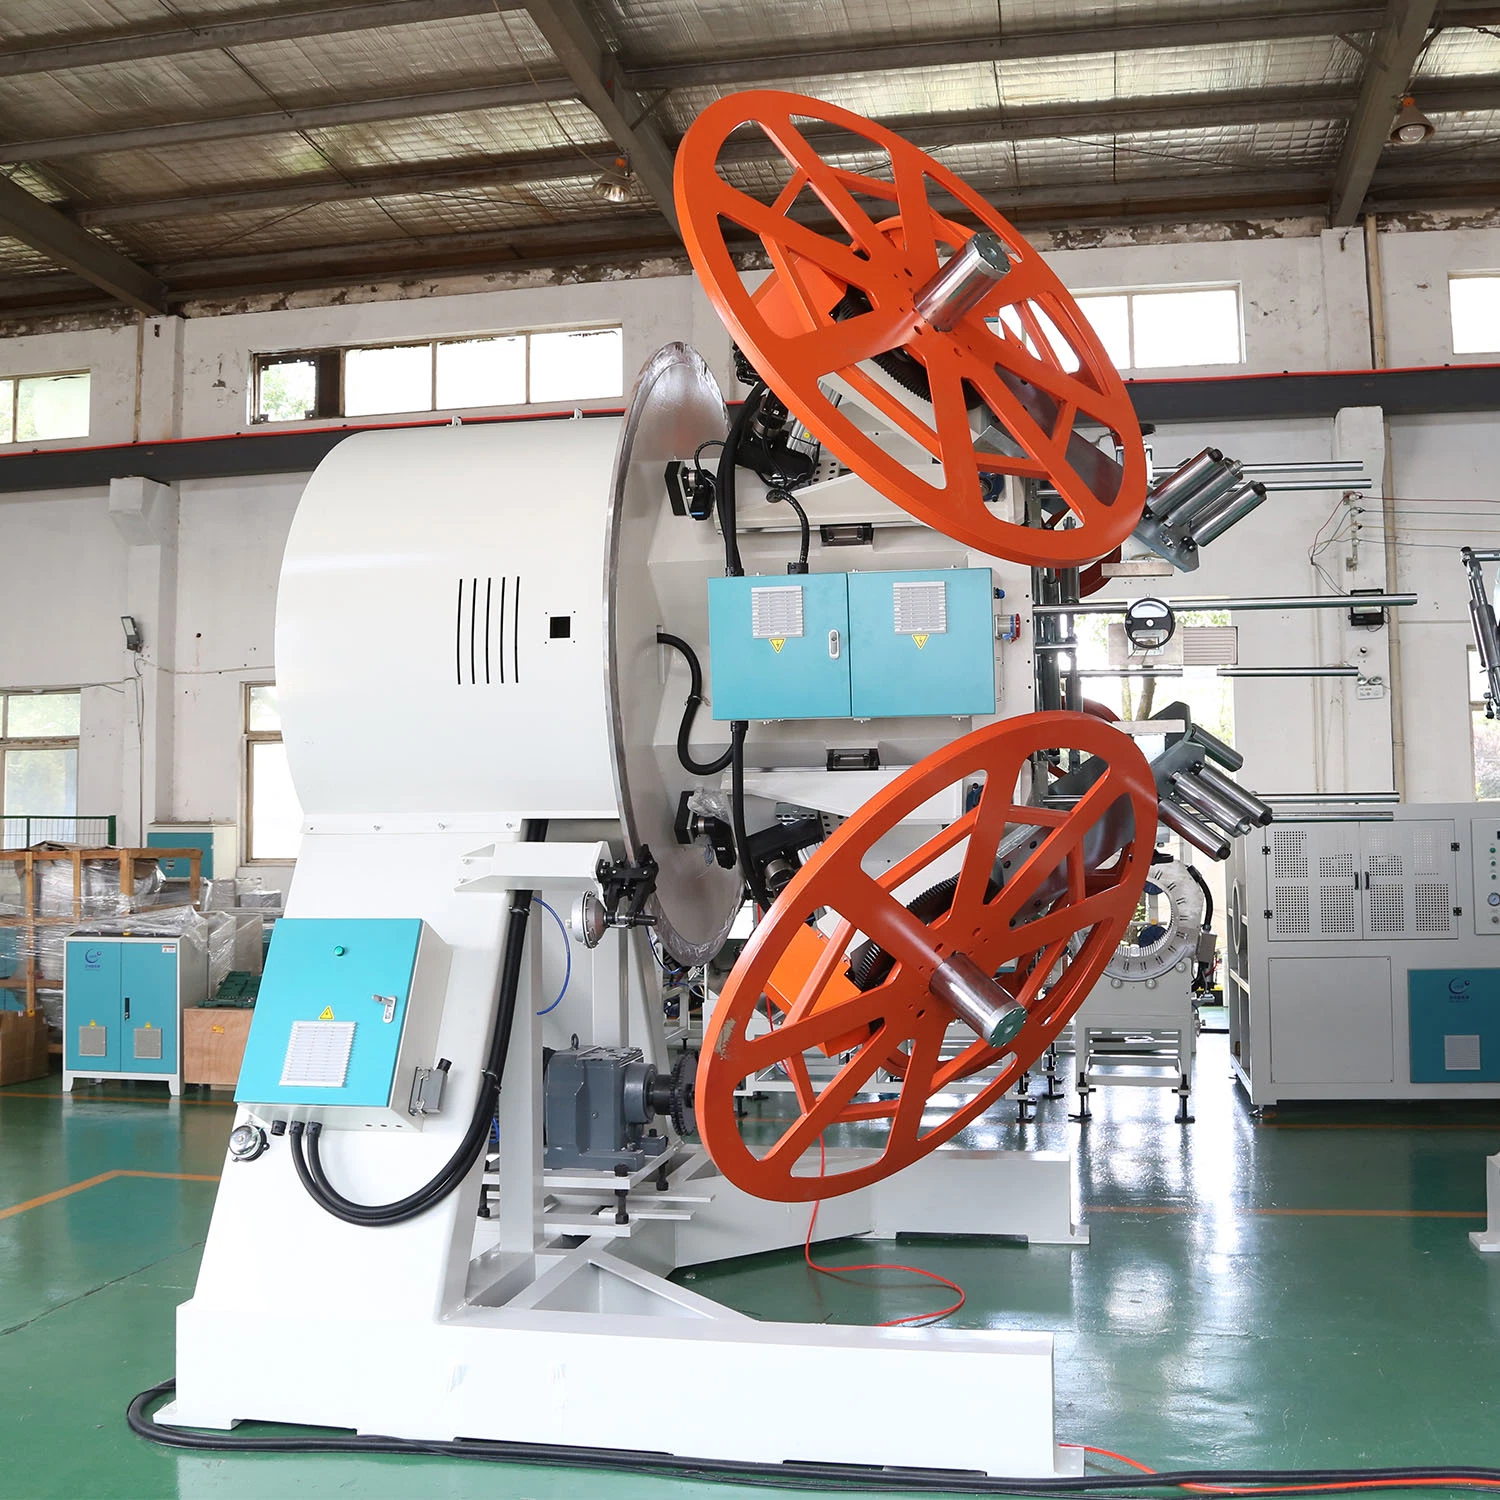 Plastic PVC/Rtp/UPVC Water& Electric Conduit Pipe/Tube (extruder, haul off, cutting winding, belling) Extrusion/Extruding Making Production Line Machine